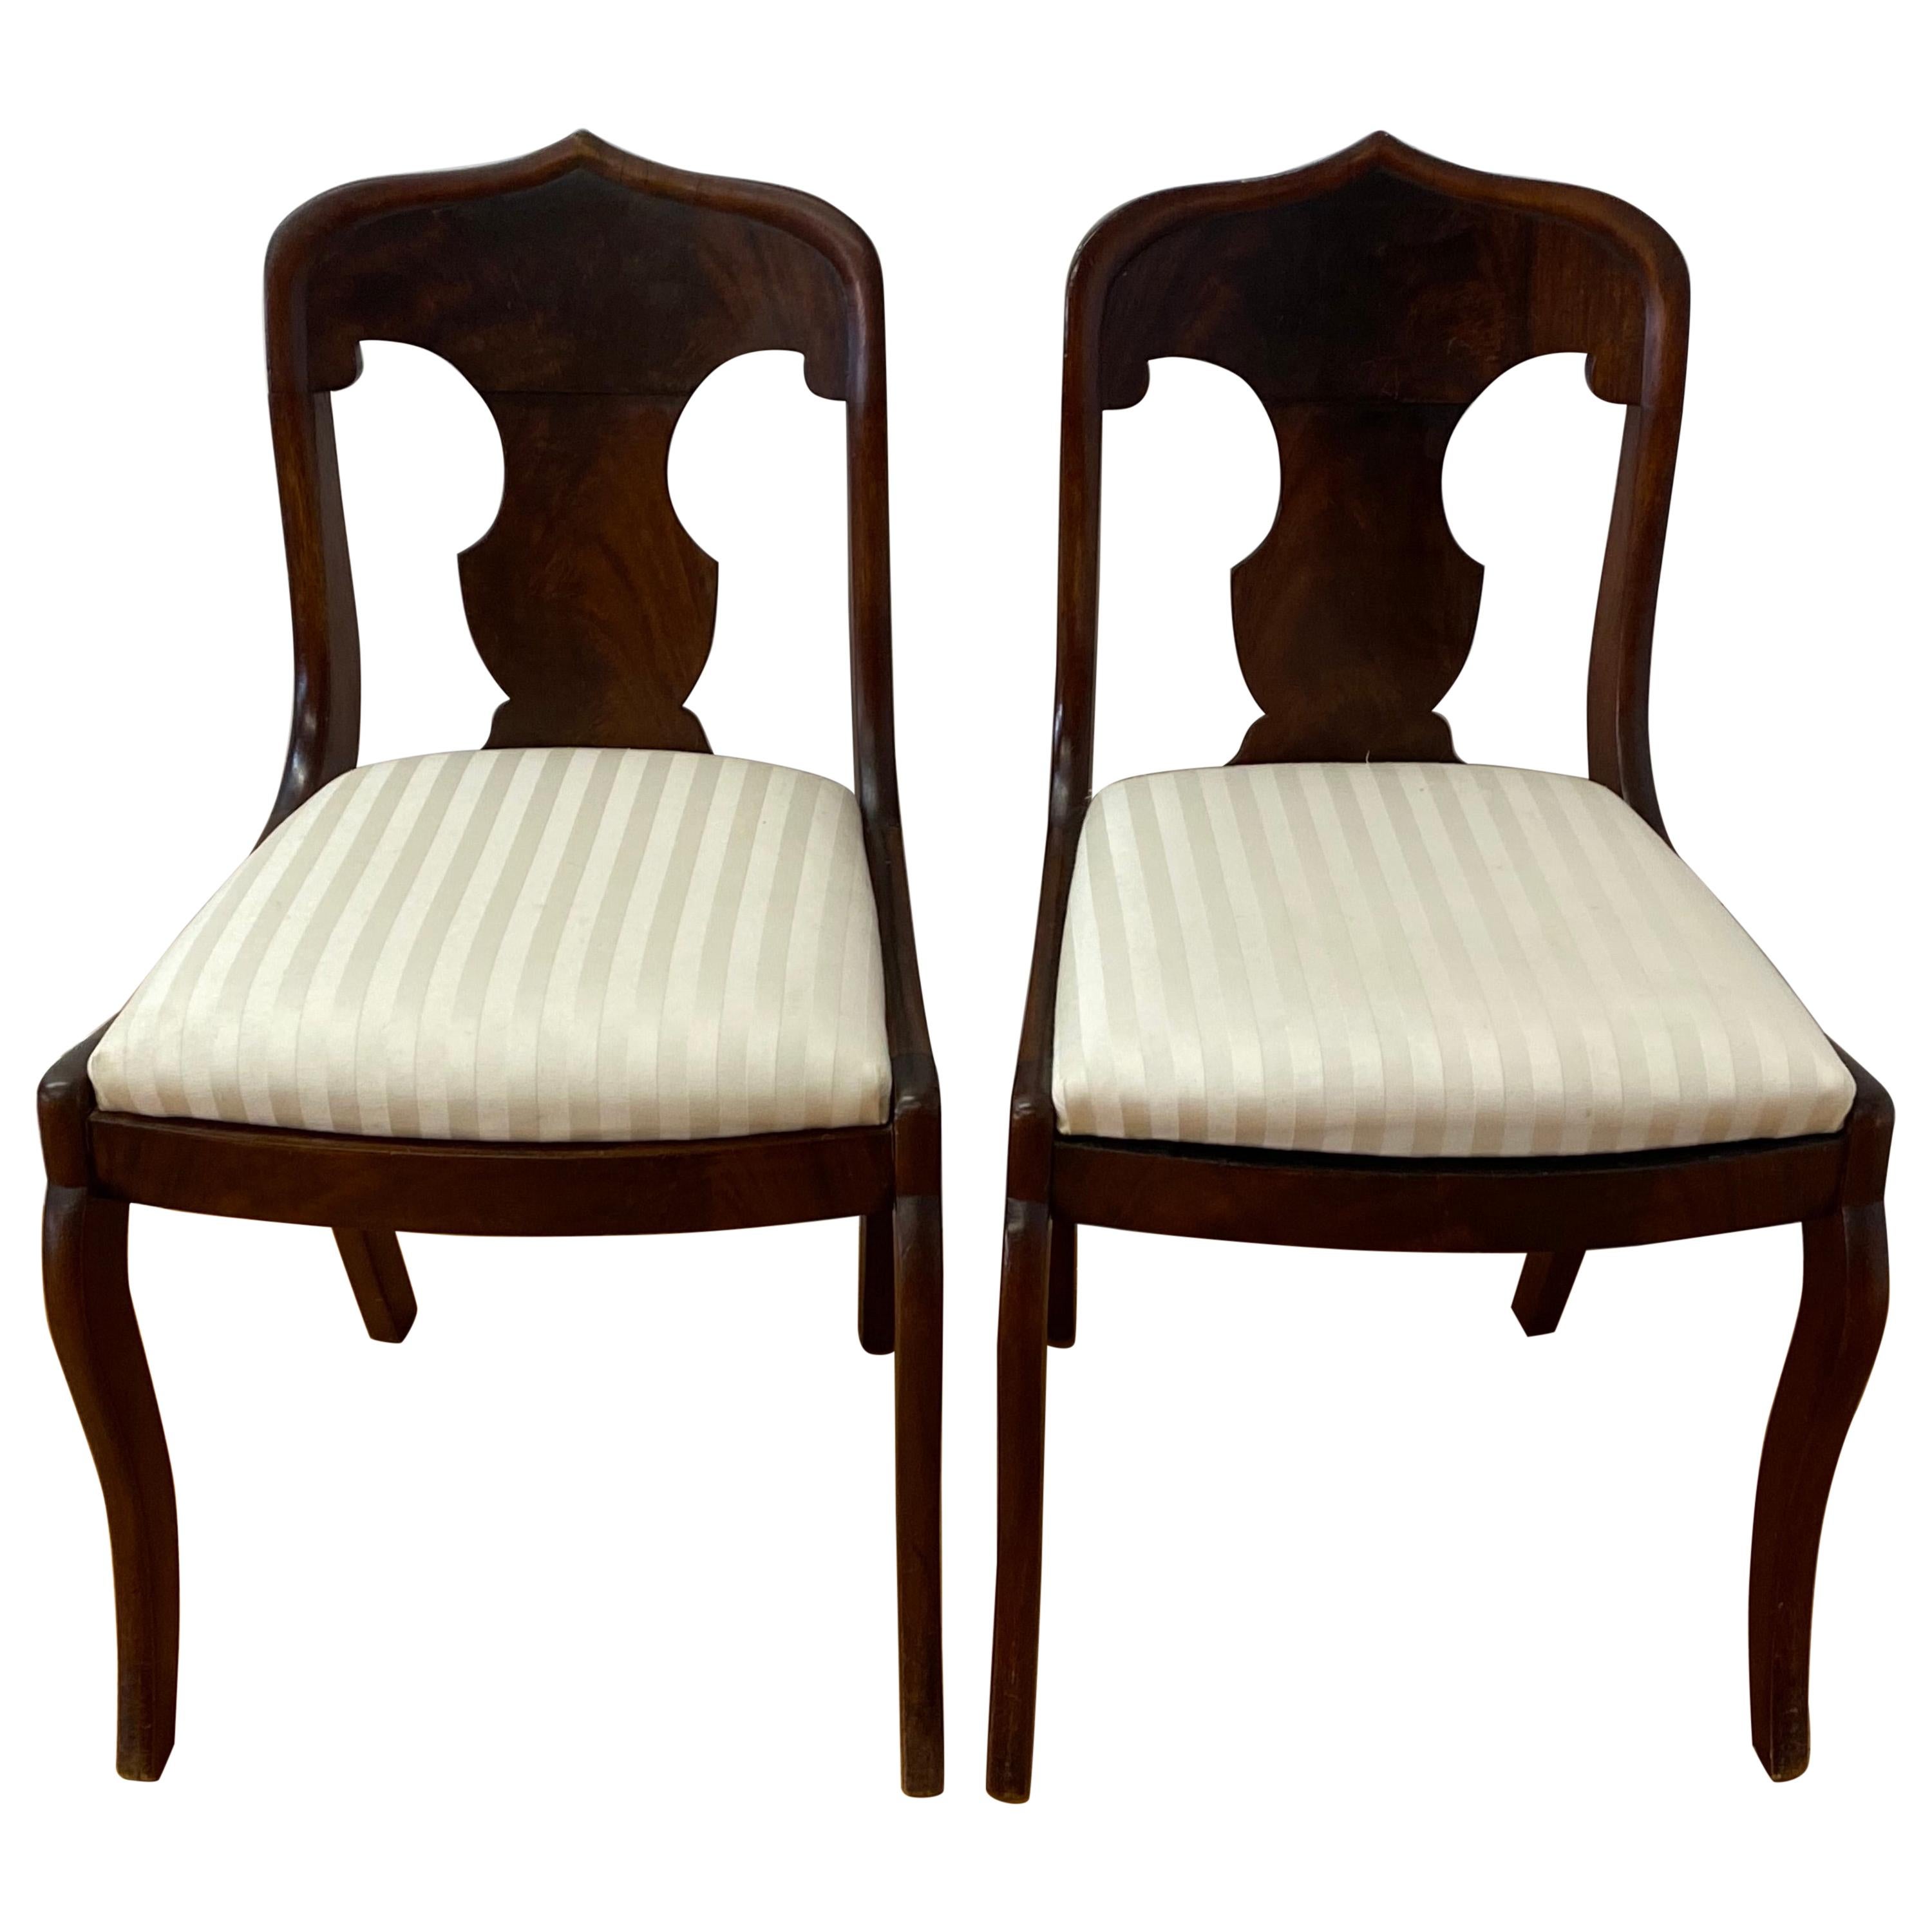 Pair of American Flame Mahogany Empire Style Side Chairs